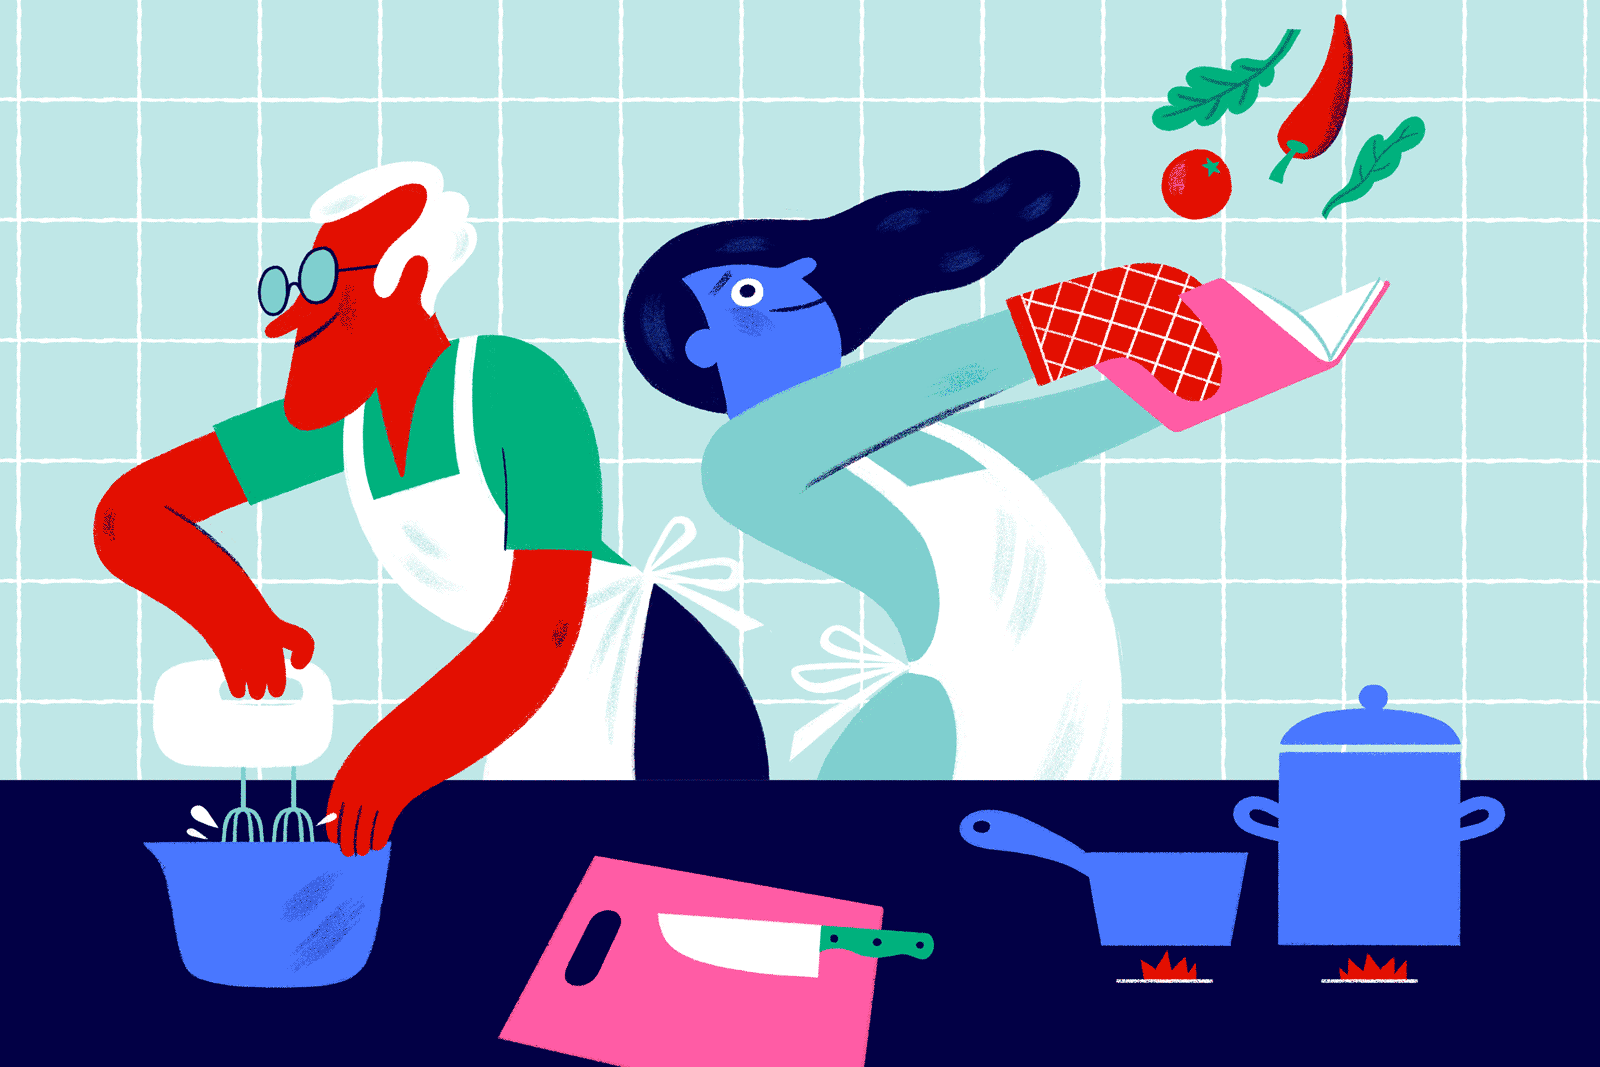 NYTimes_HolidayBooks_Section4Cooking_AnimationDEF_1600x1067